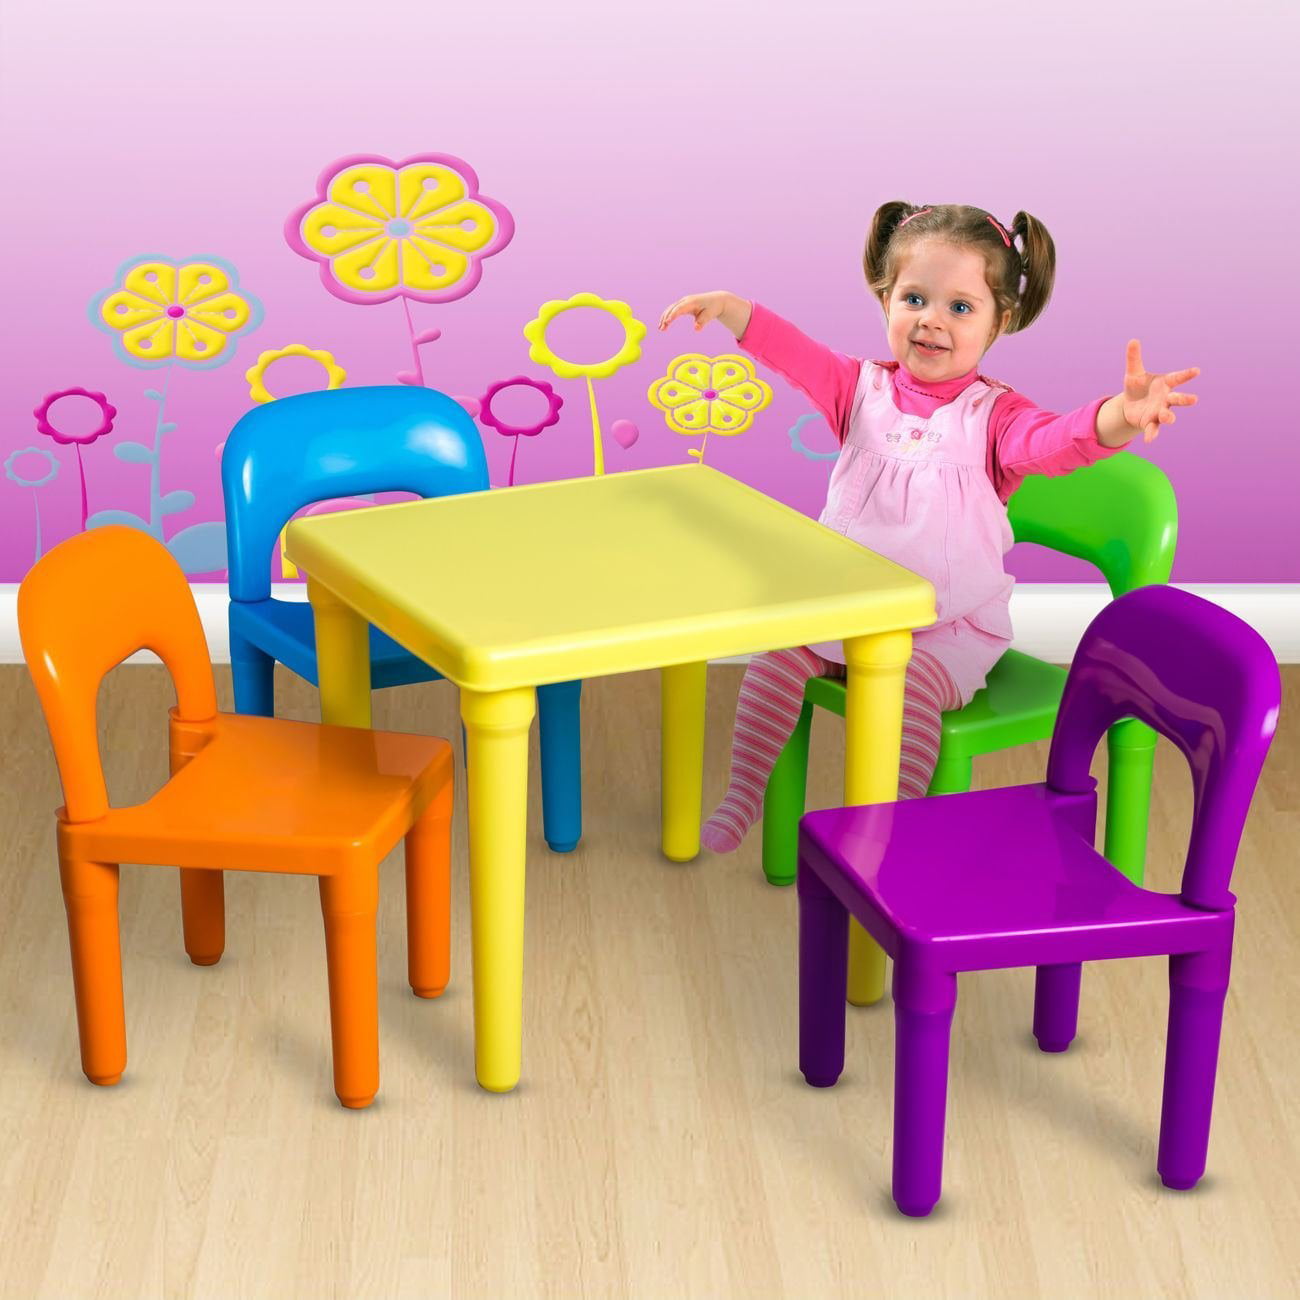 toy chairs for toddlers